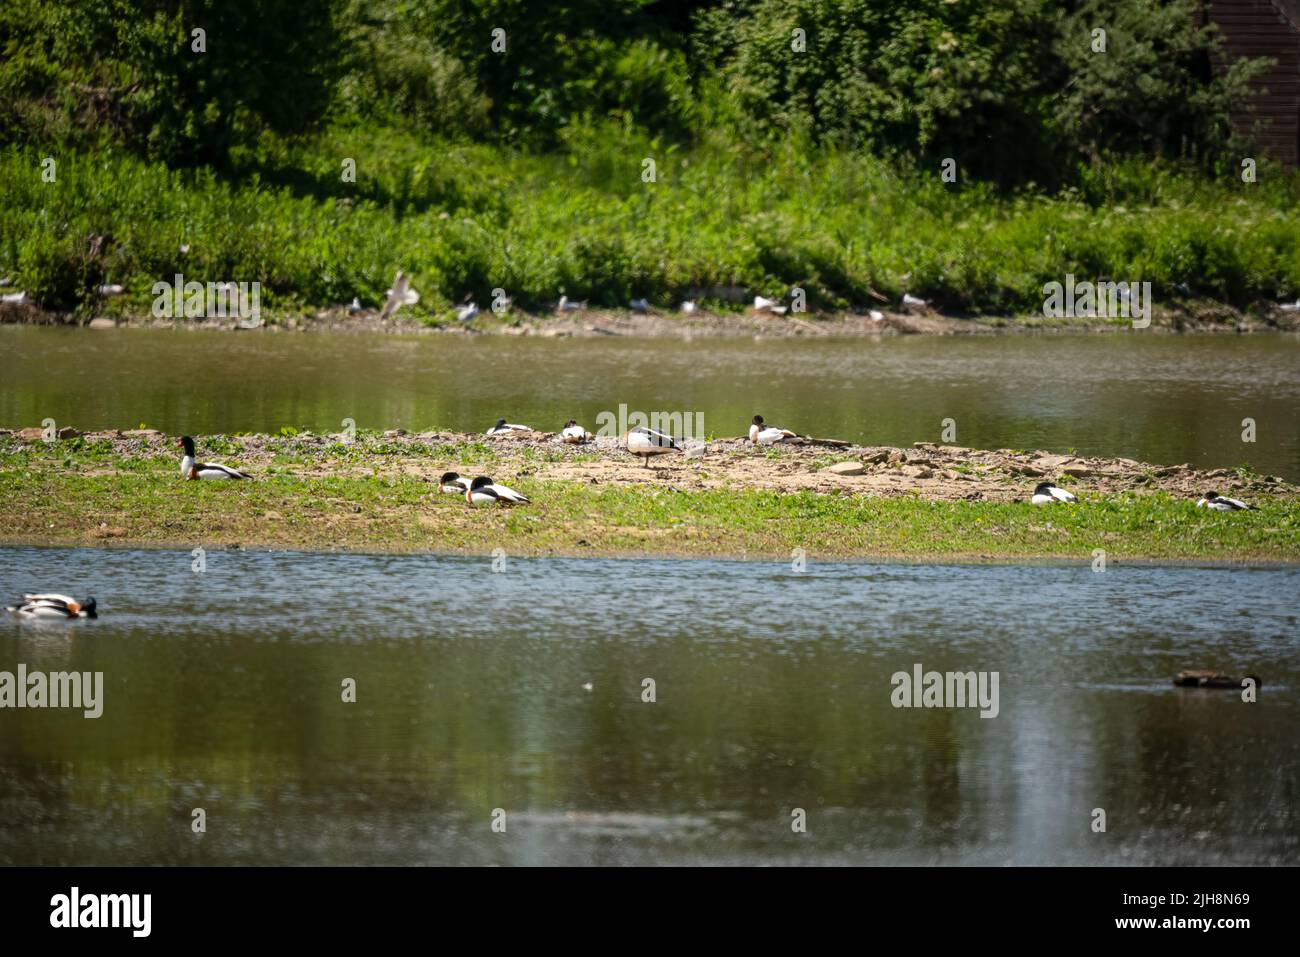 waterfowl, ducks, geese, swans and seagulls on a sanctuary lake island Stock Photo